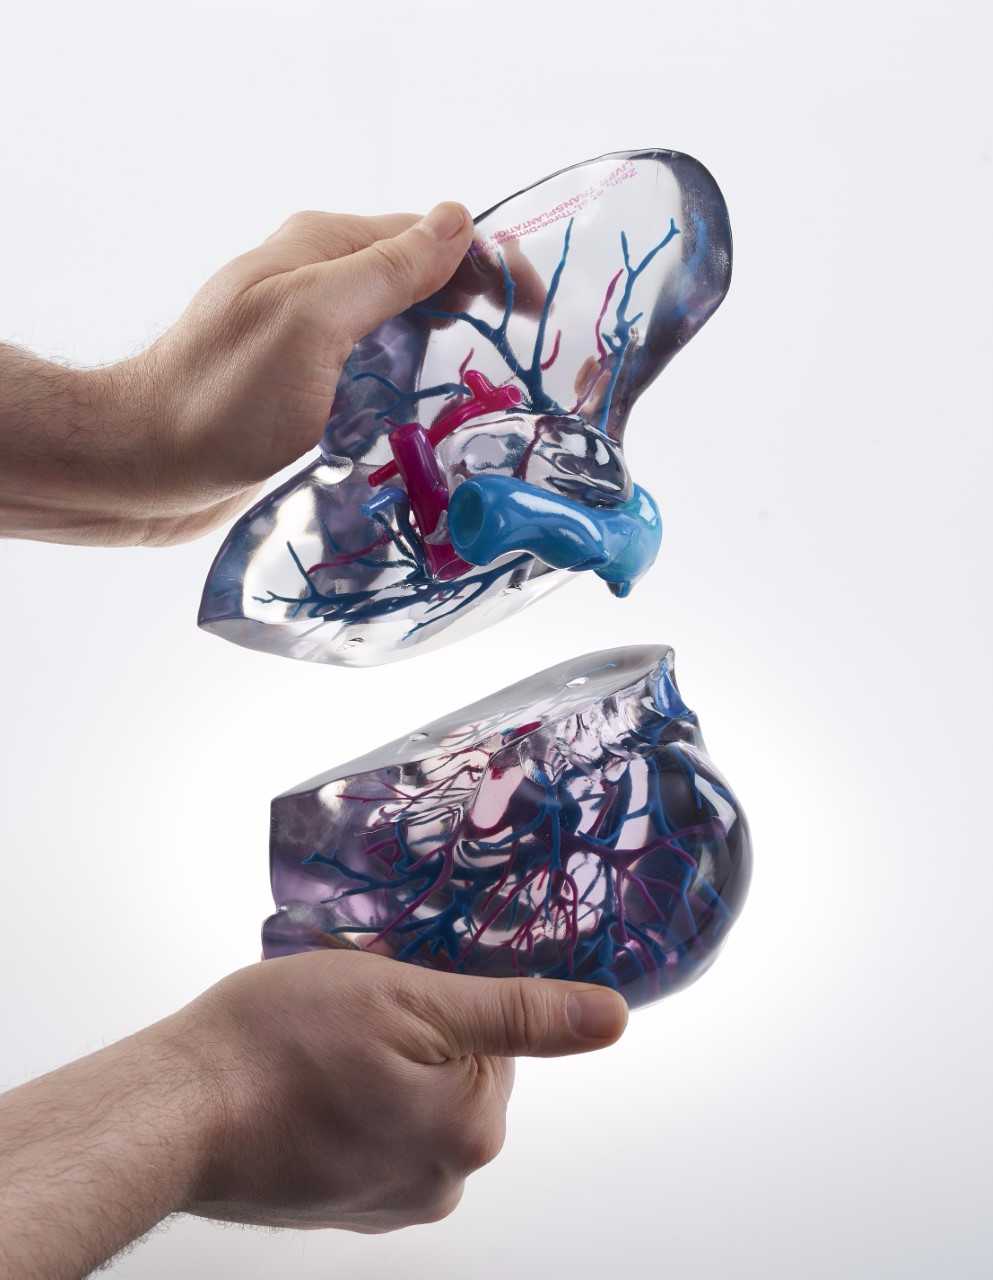 A 3D Printed medical model created with IntelliSpace Portal's built in 3D modeling application. Photo via Phillips.